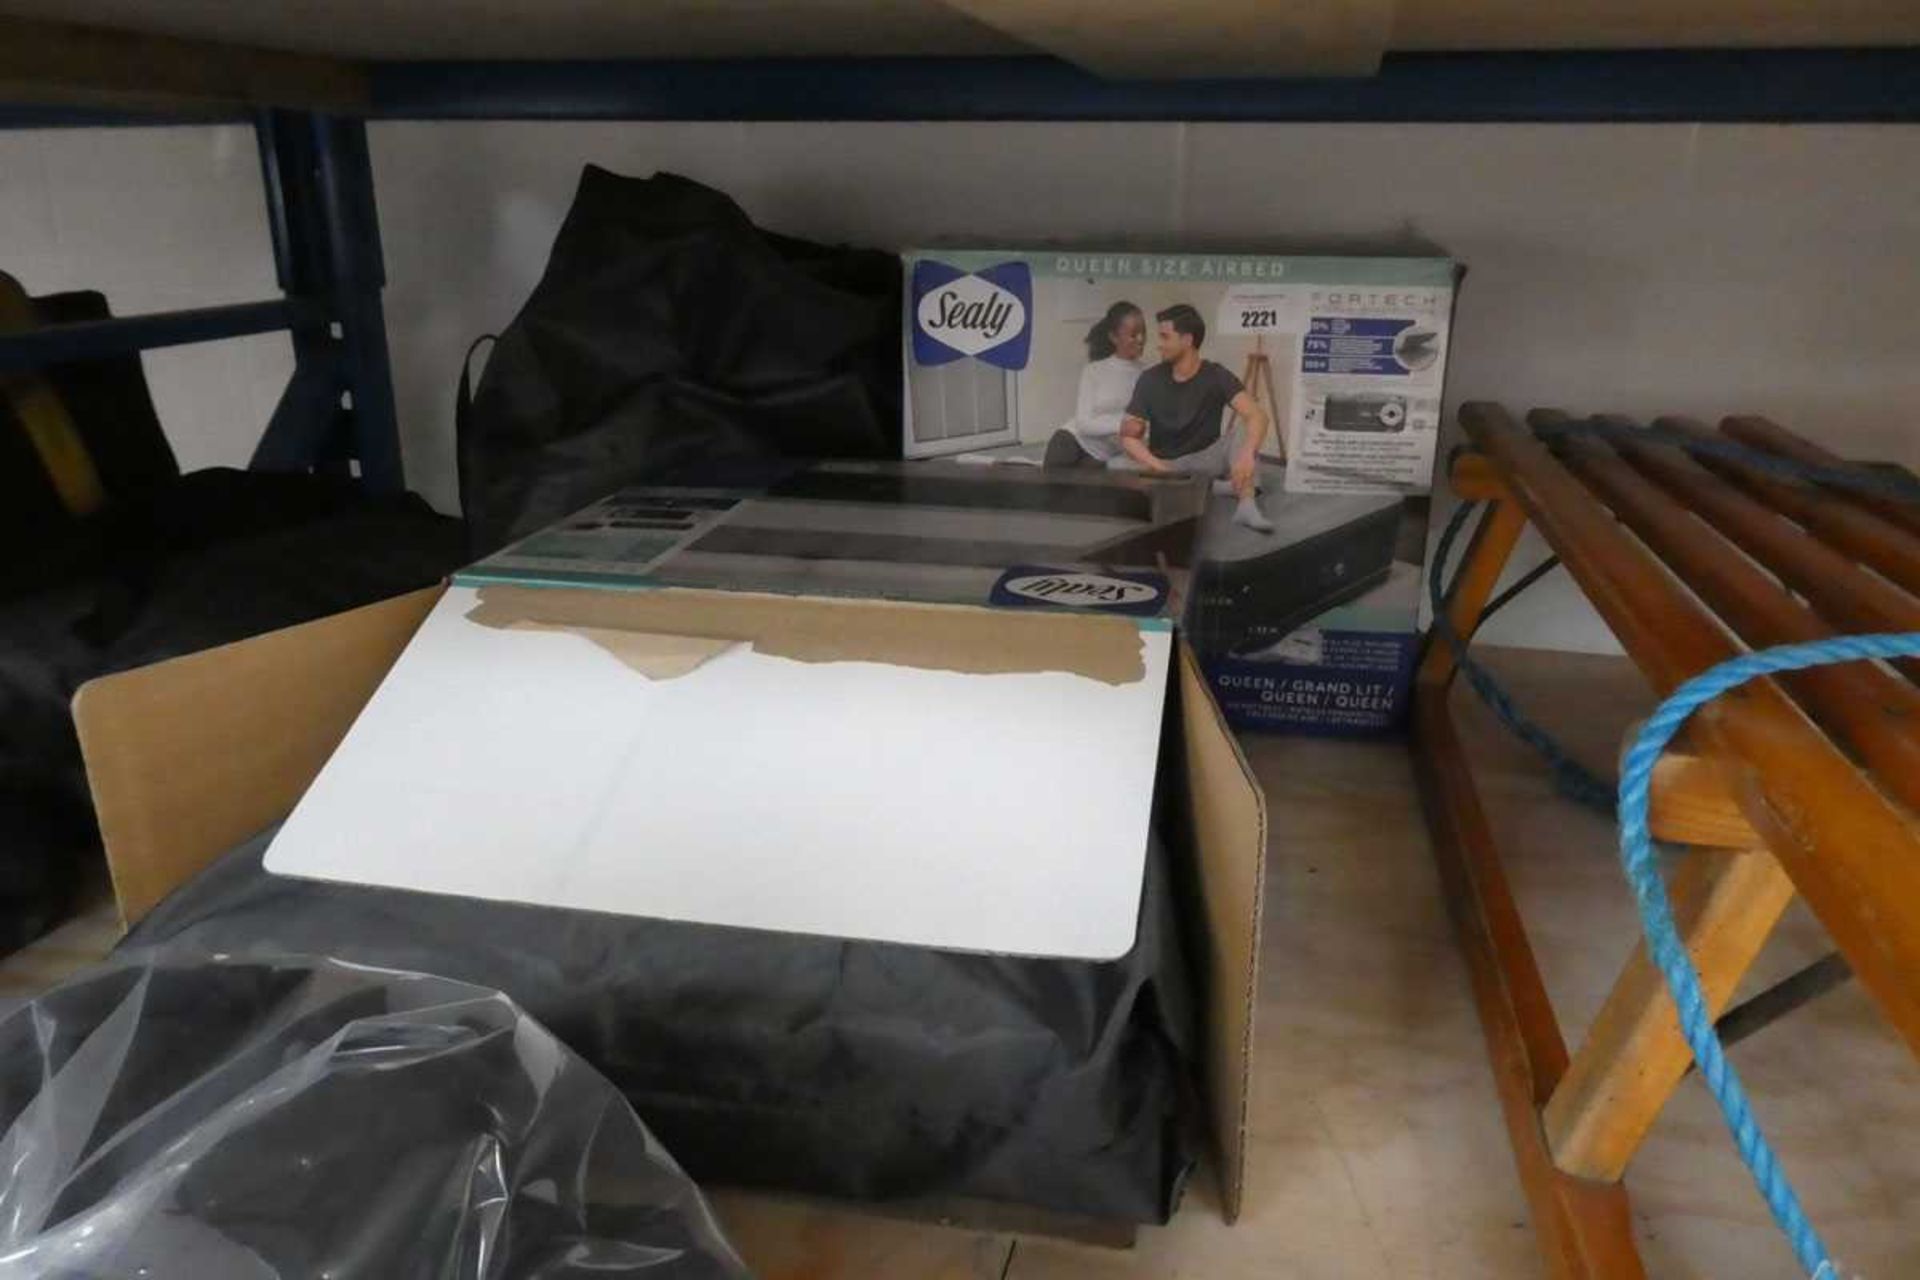 +VAT 3 Sealy queen size airbeds, 2 boxed and 1 unboxed